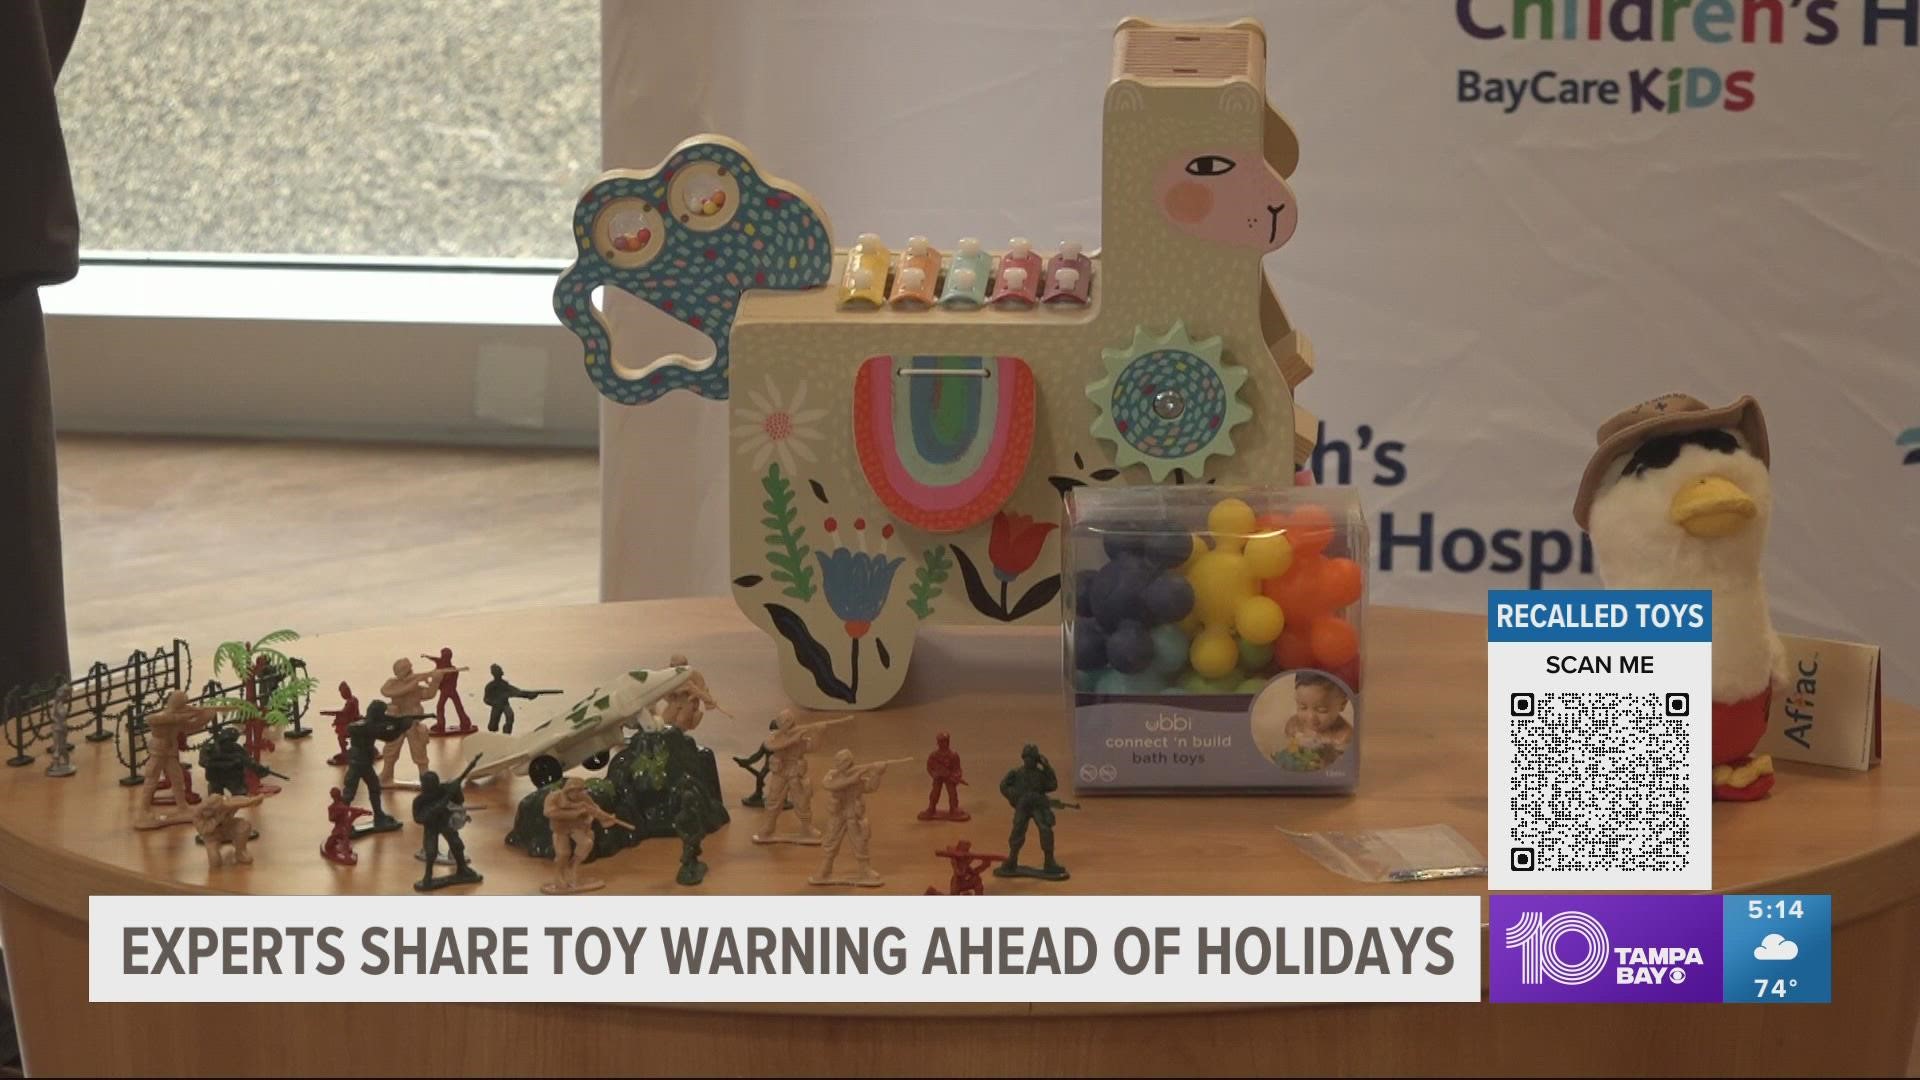 Toys flagged each year by the U.S. PIRG Education Fund often include items with toxins or choking hazards, like magnets and batteries.